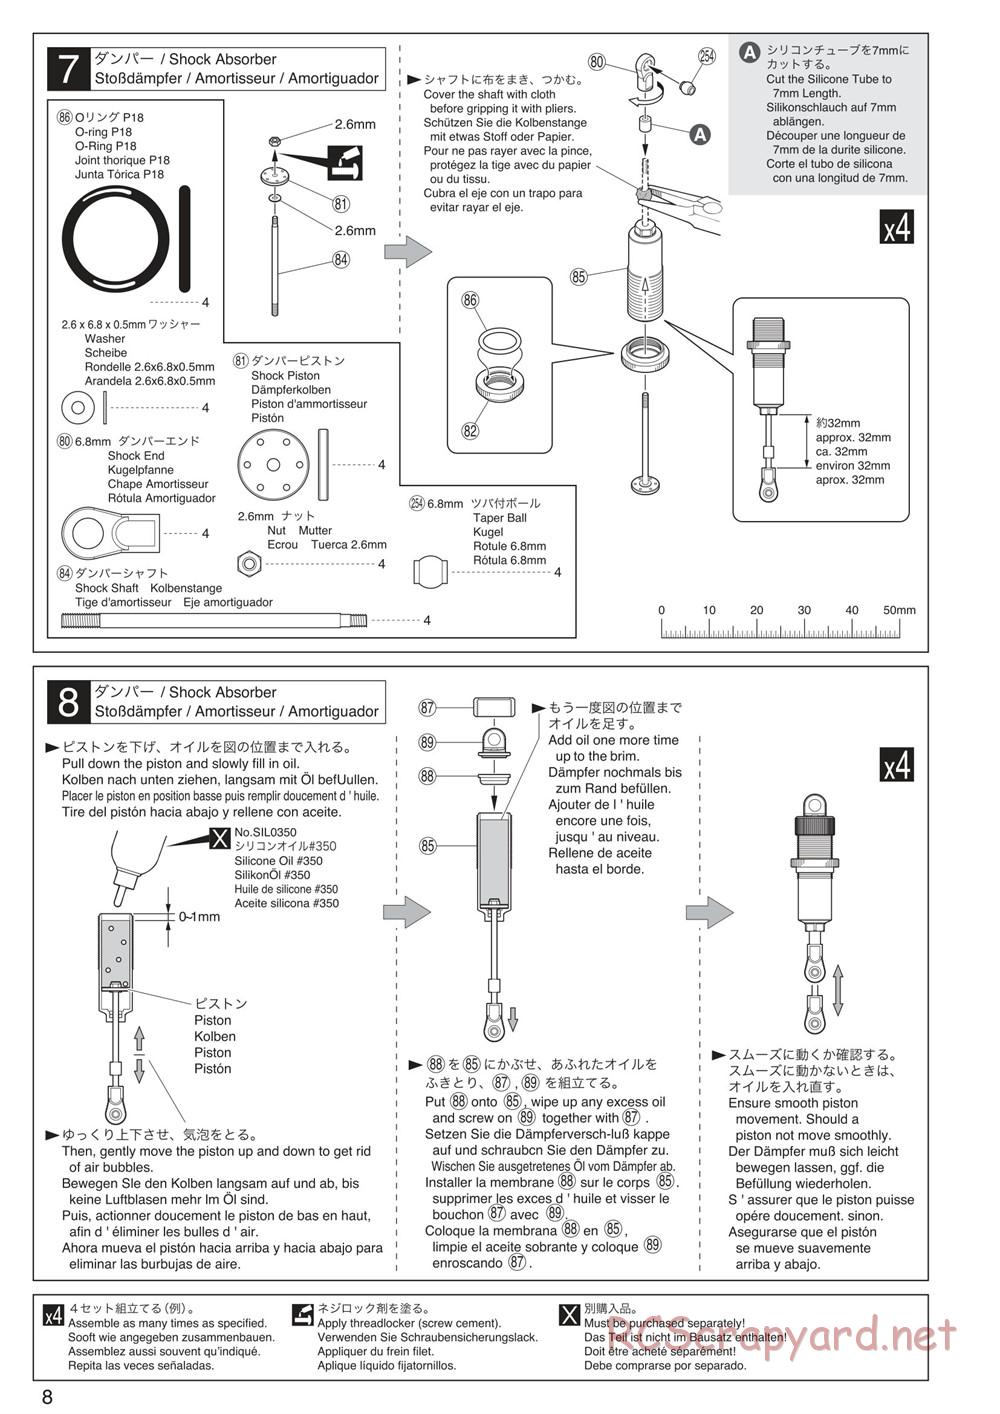 Kyosho - Mad Crusher VE - Manual - Page 8